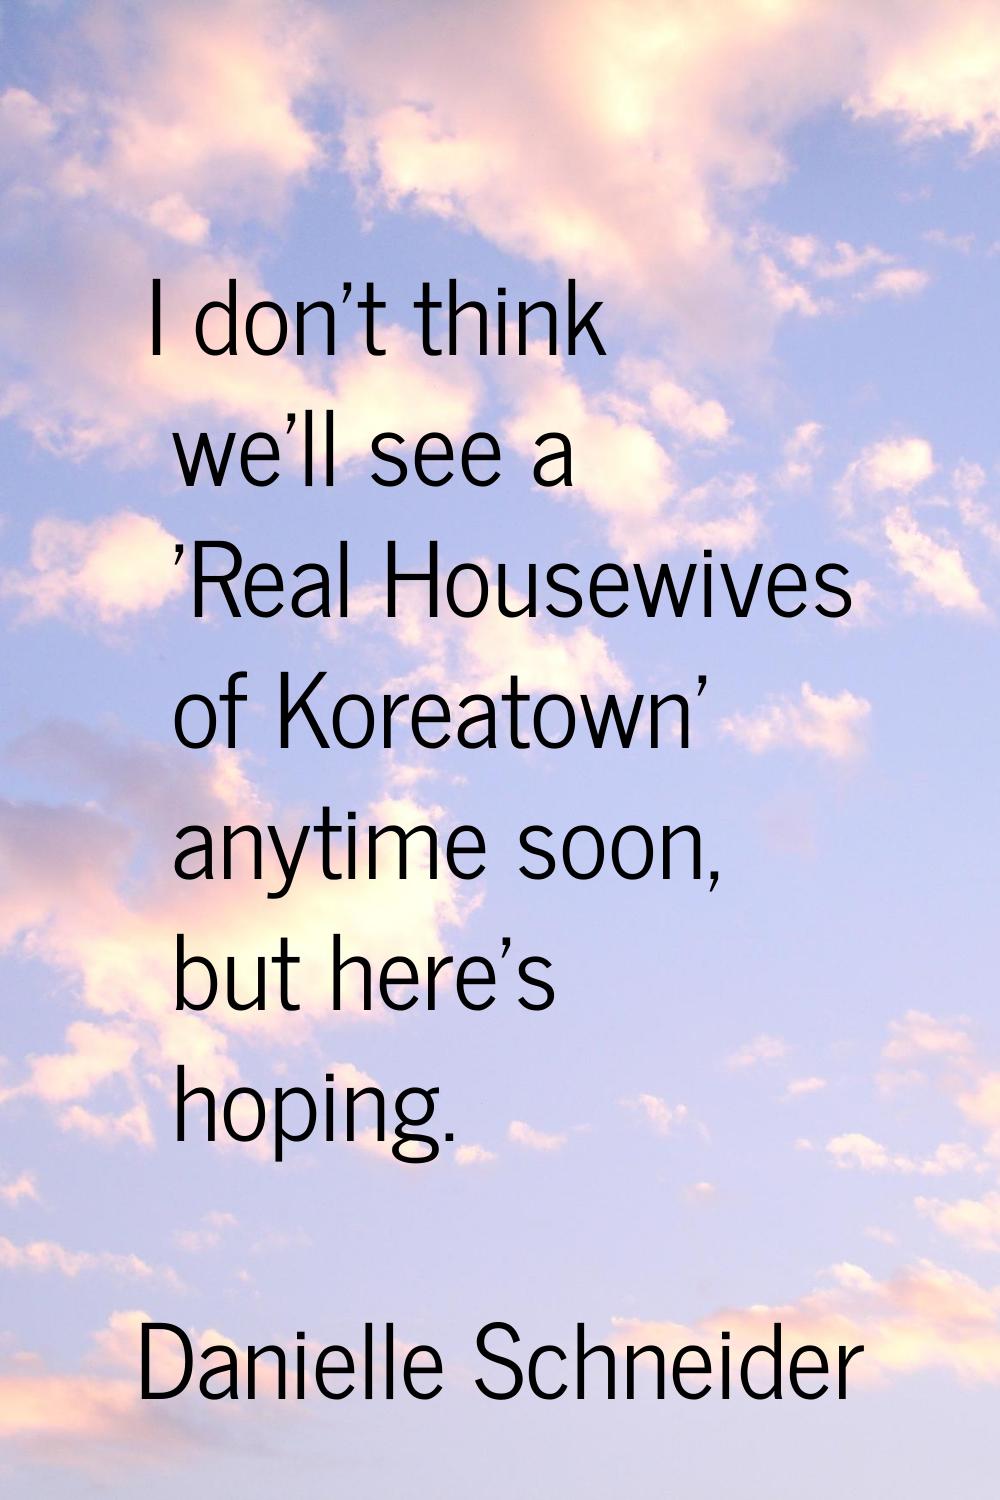 I don't think we'll see a 'Real Housewives of Koreatown' anytime soon, but here's hoping.